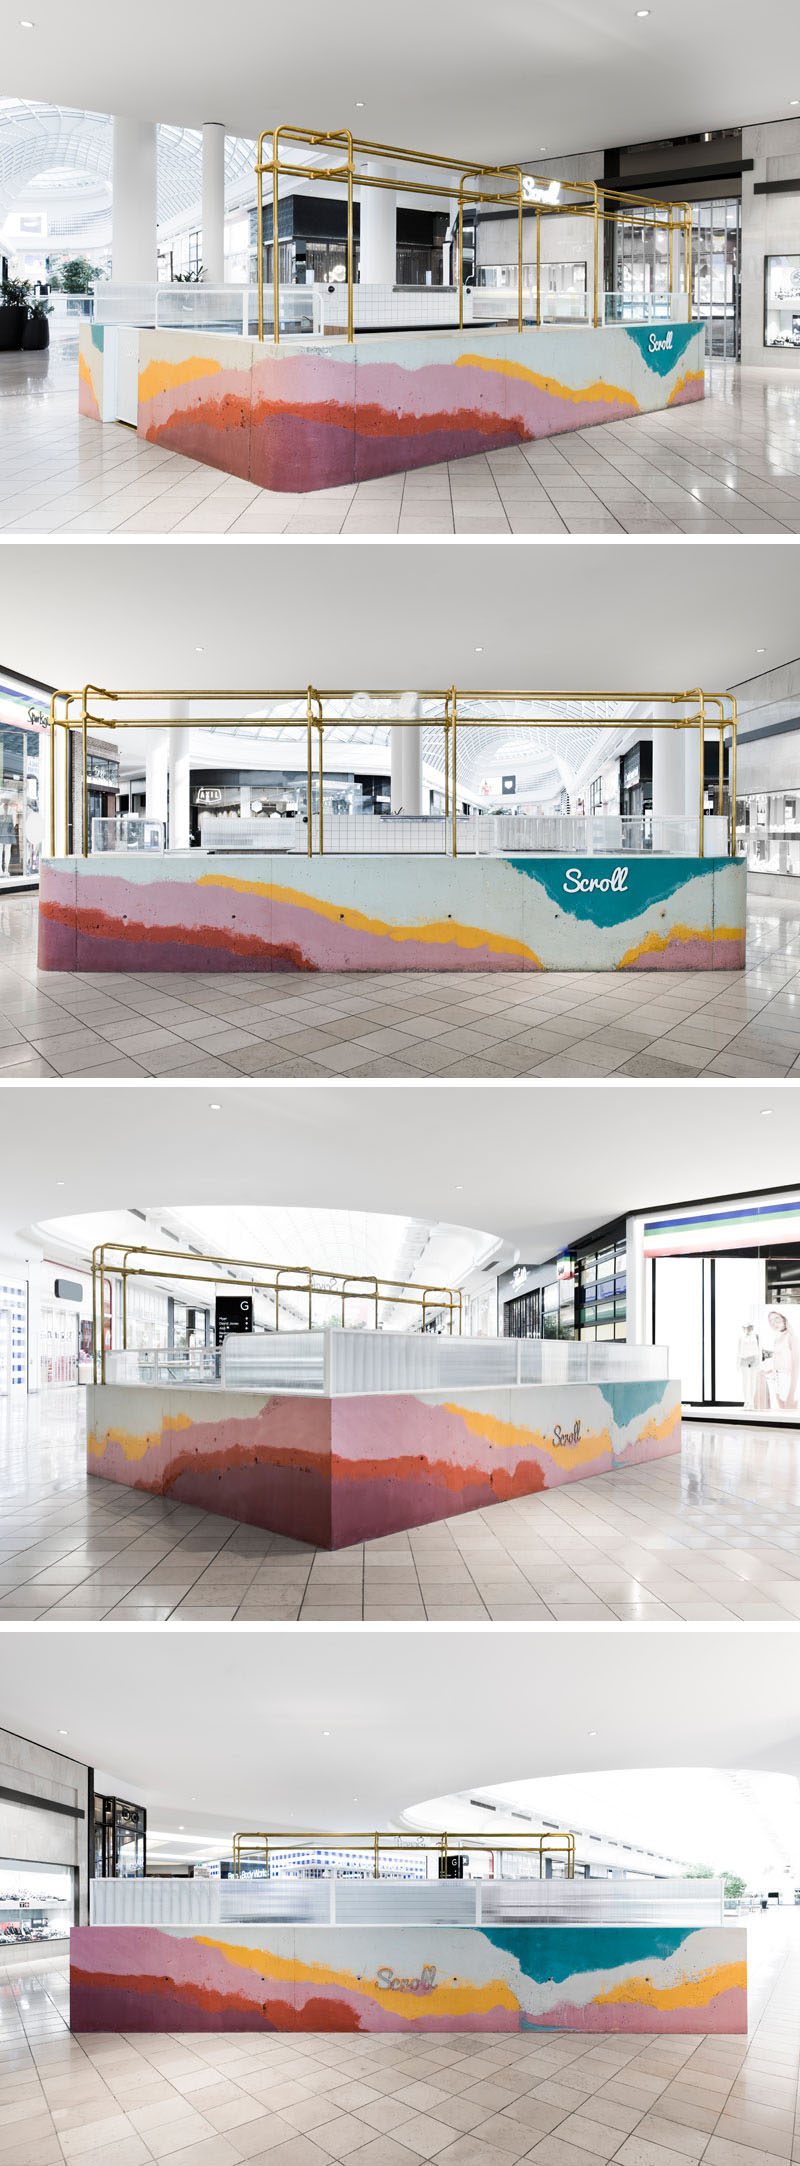 Layers of colorful concrete were poured onsite into a formwork mold to create a bar for Scroll Ice Cream's flagship store in Australia.